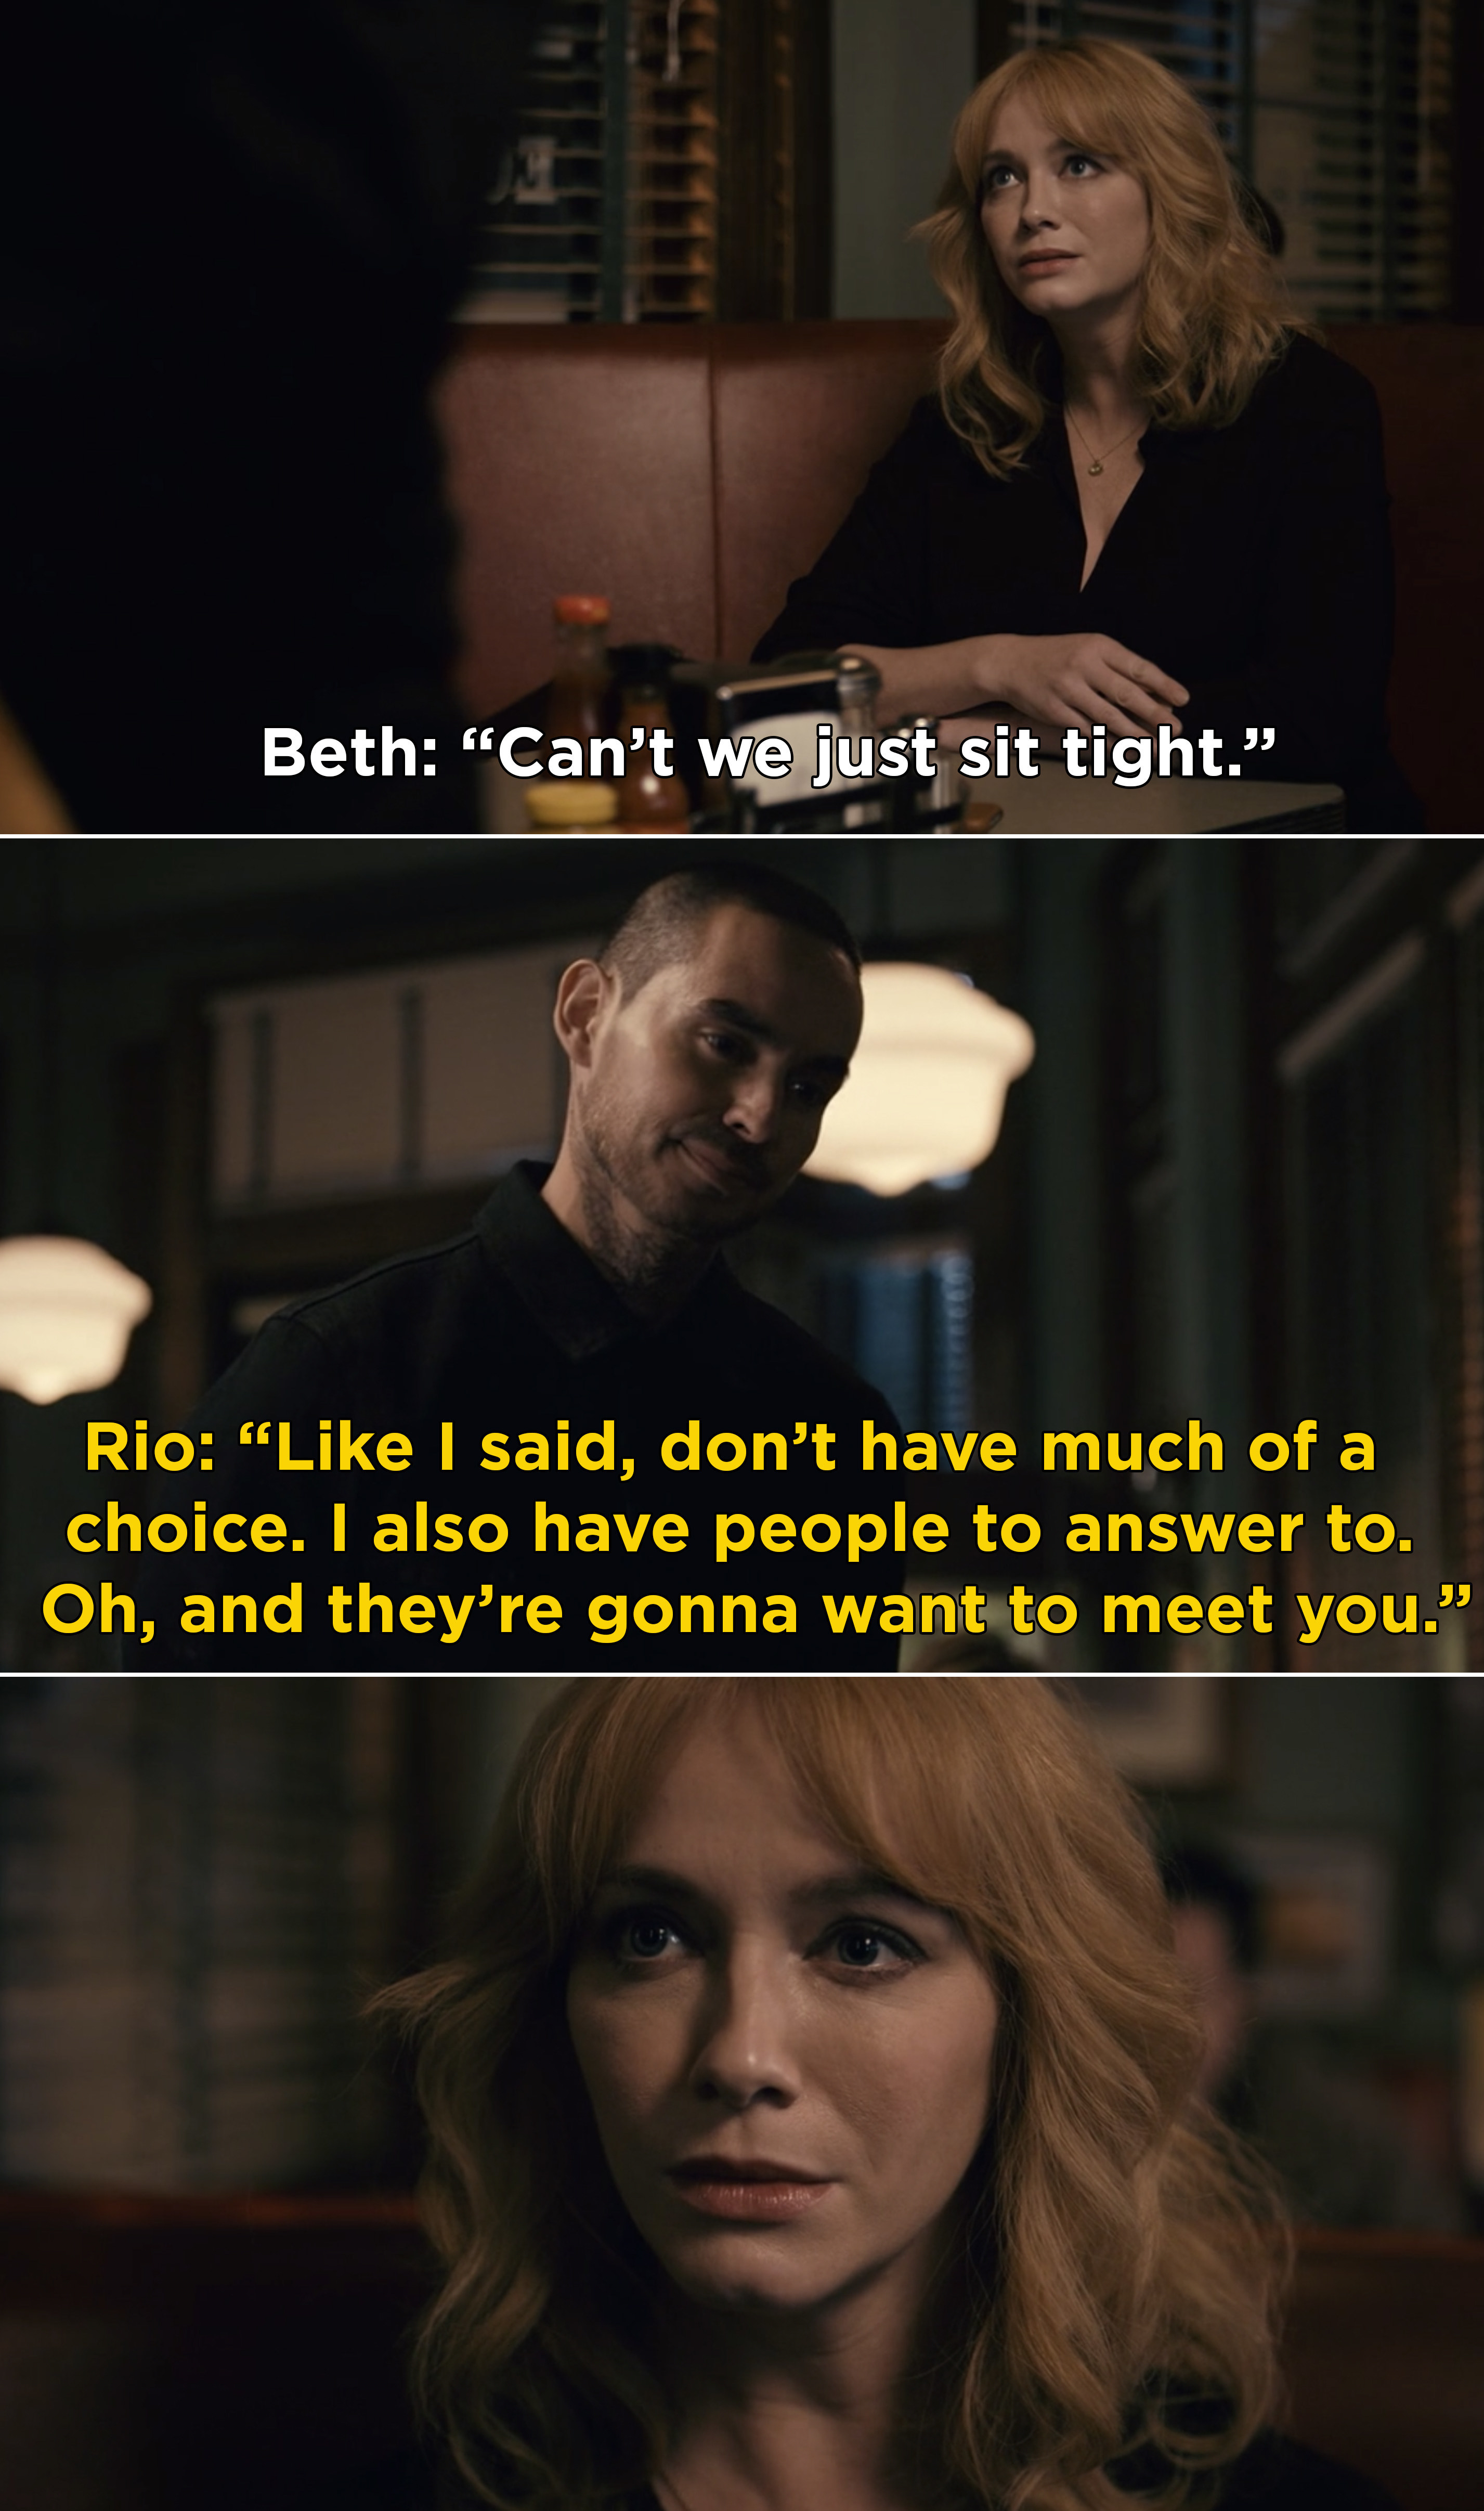 Beth: &quot;Can&#x27;t we just sit tight?&quot; Rio: &quot;Don&#x27;t have much of a choice, I also have people to answer to and they&#x27;re gonna want to meet you&quot;